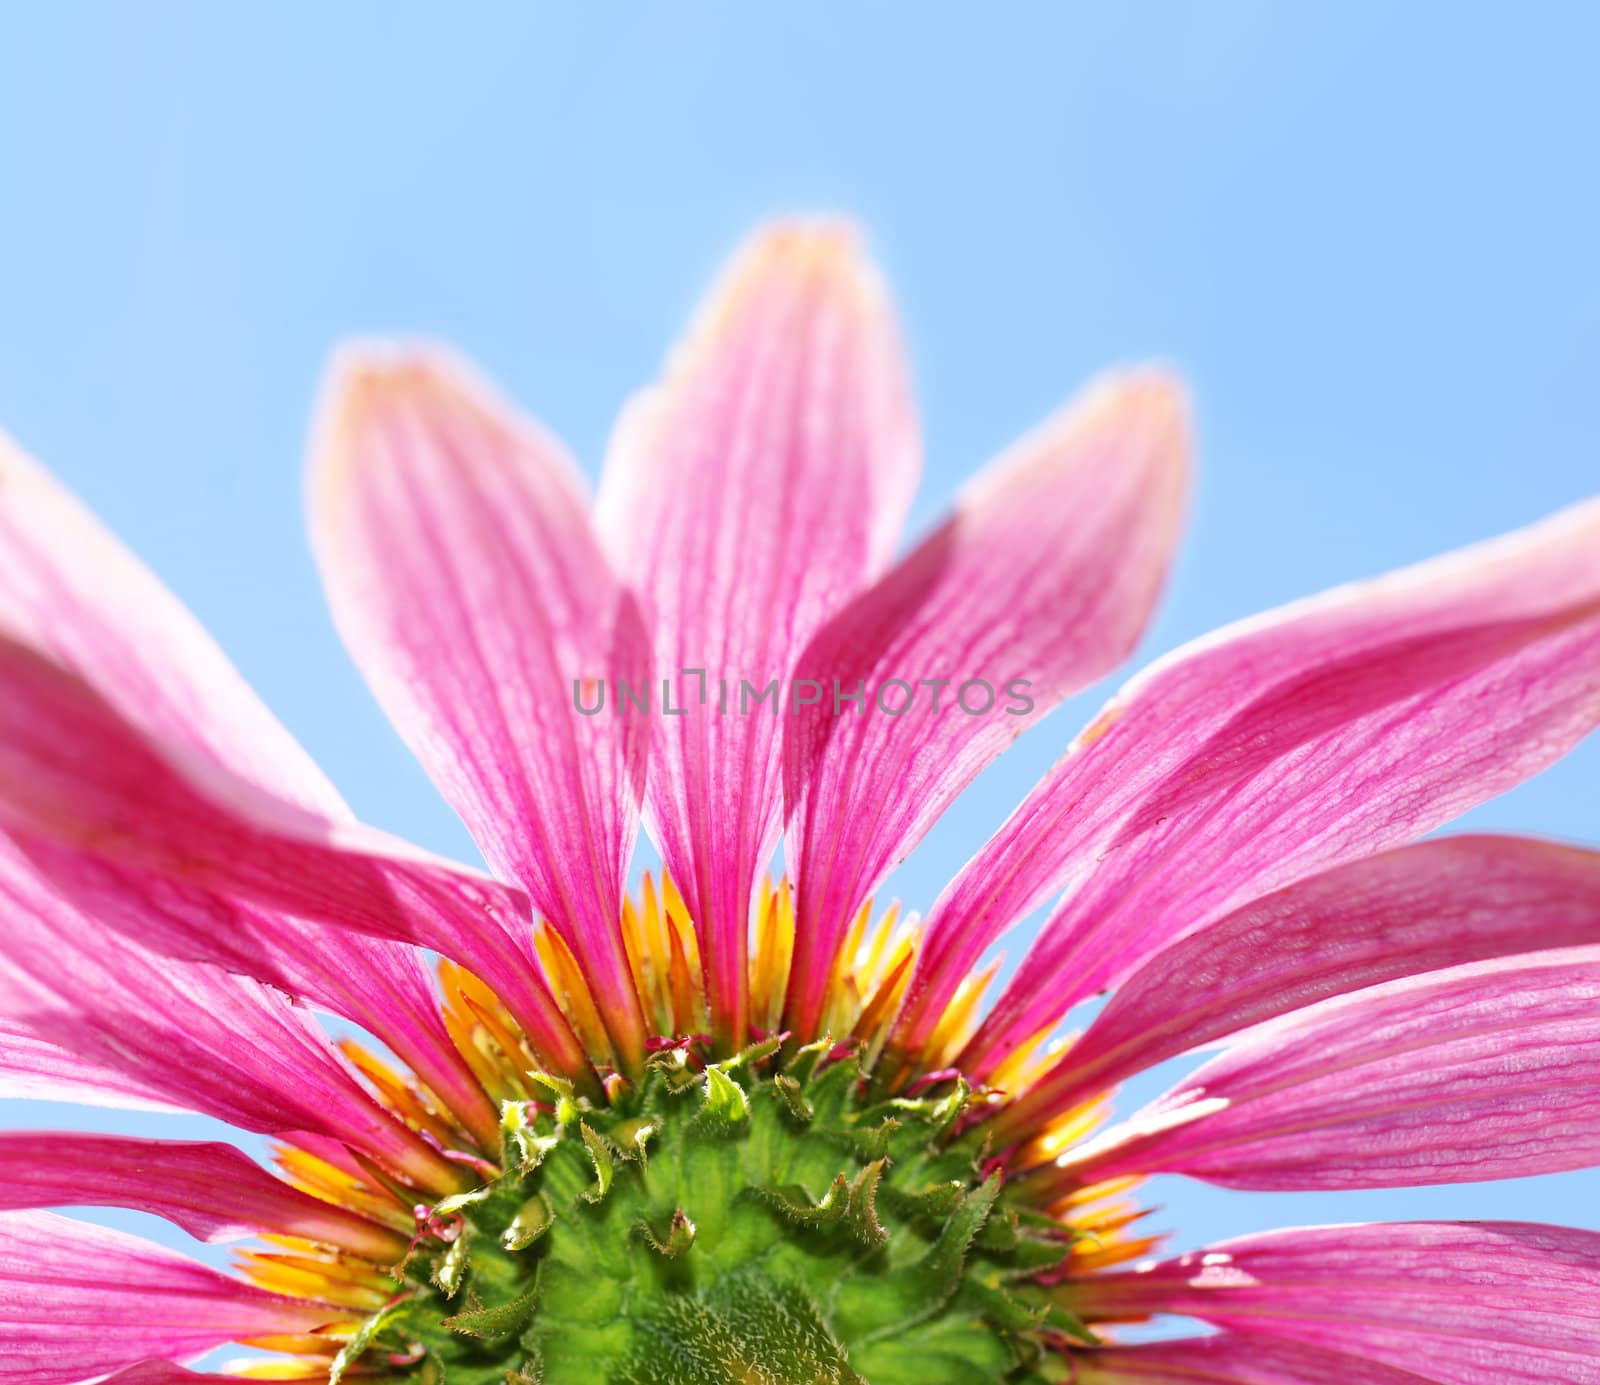 Fun artistic different point of vue of a beautiful medicinal coneflower, Echinacea purpurea, with its bright pink petals, orange core and green stem agains the blue sky.